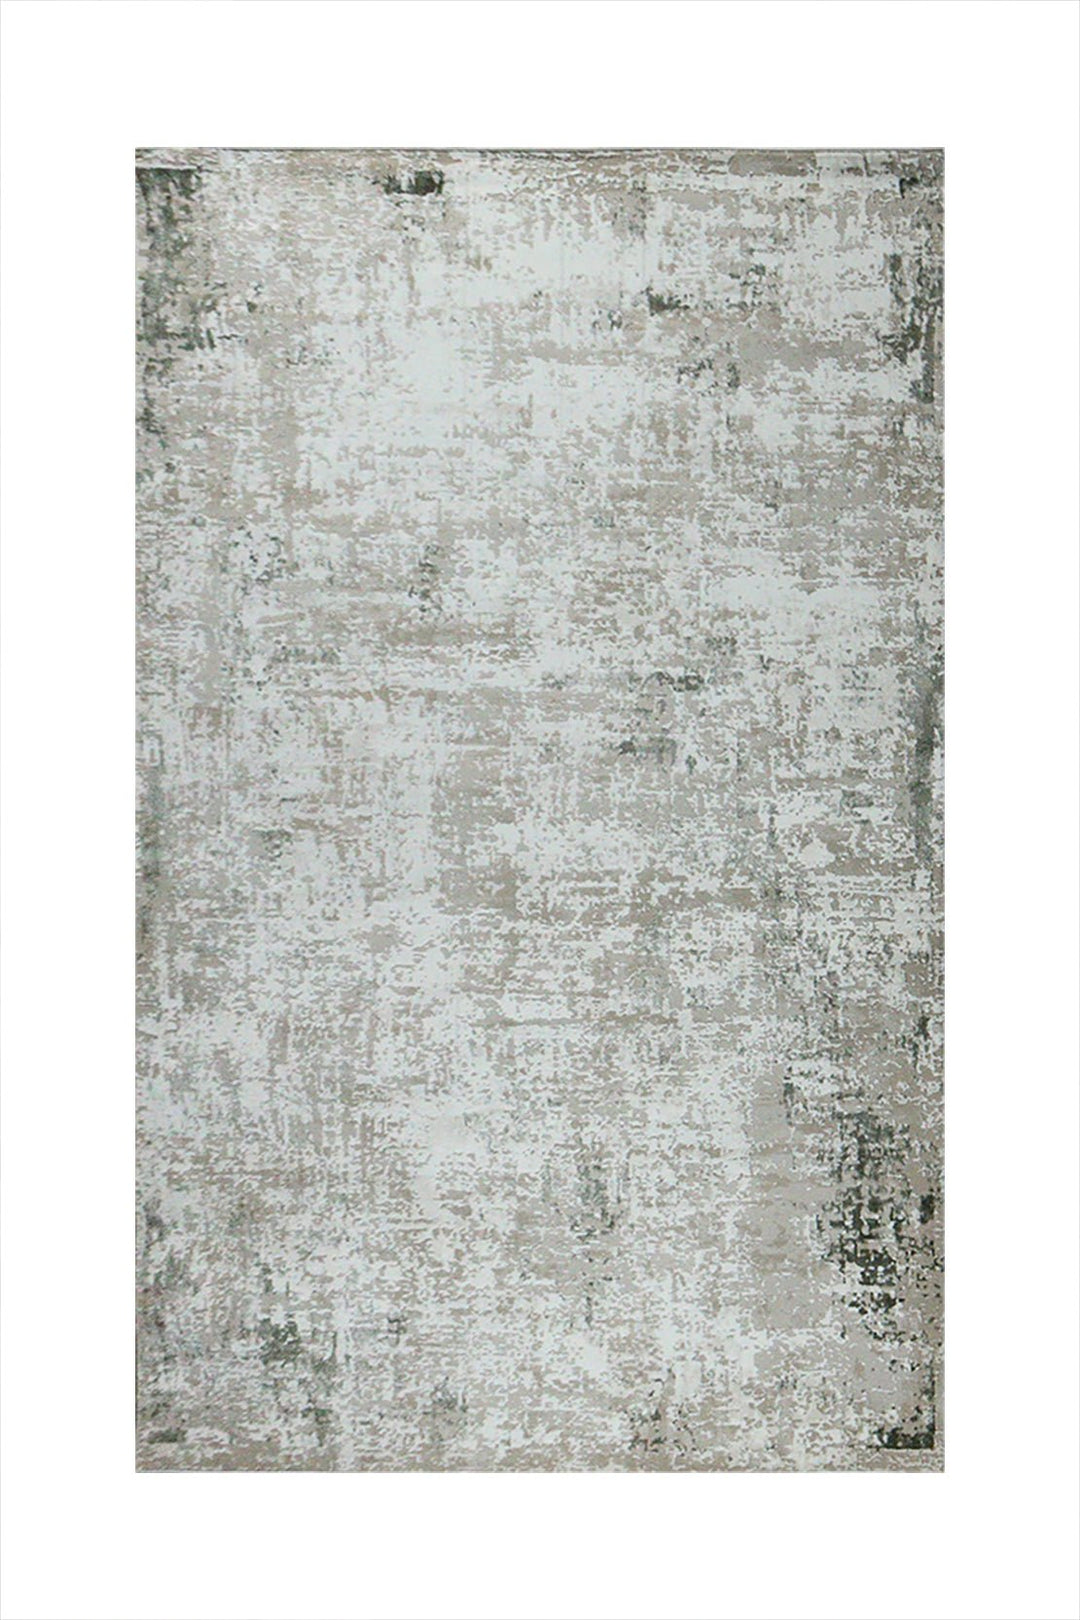 Turkish Modern Festival 1 Rug - 5.2 x 7.5 FT - Gray - Sleek and Minimalist for Chic Interiors - V Surfaces